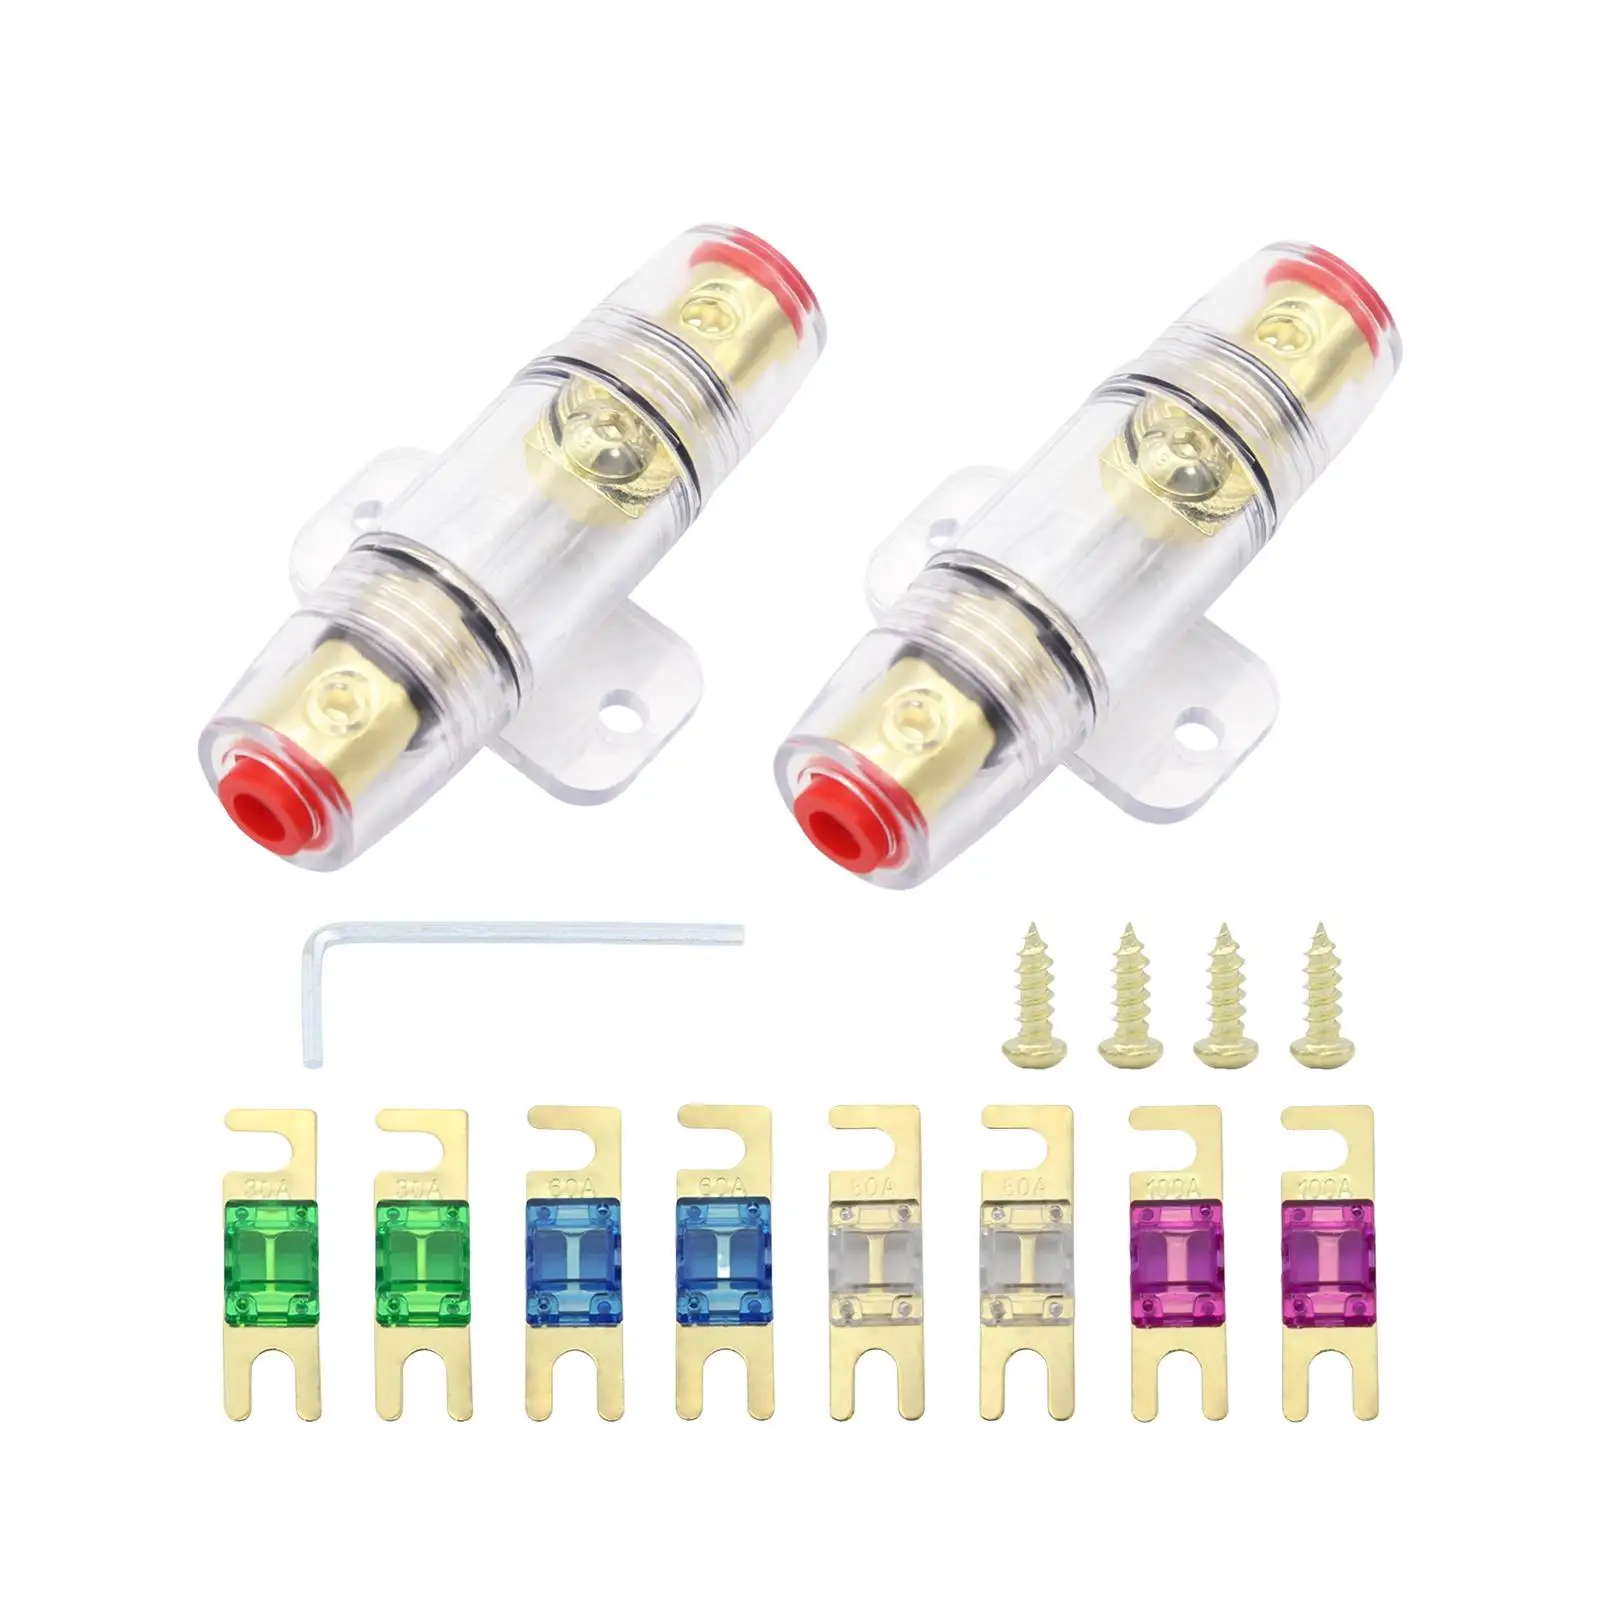 2 Pieces Mini Anl Fuse Holder Set for Car Stereo, Compressor for Car Marine Boat Motor Replacement with 30A 60A 80A 100A Fuses